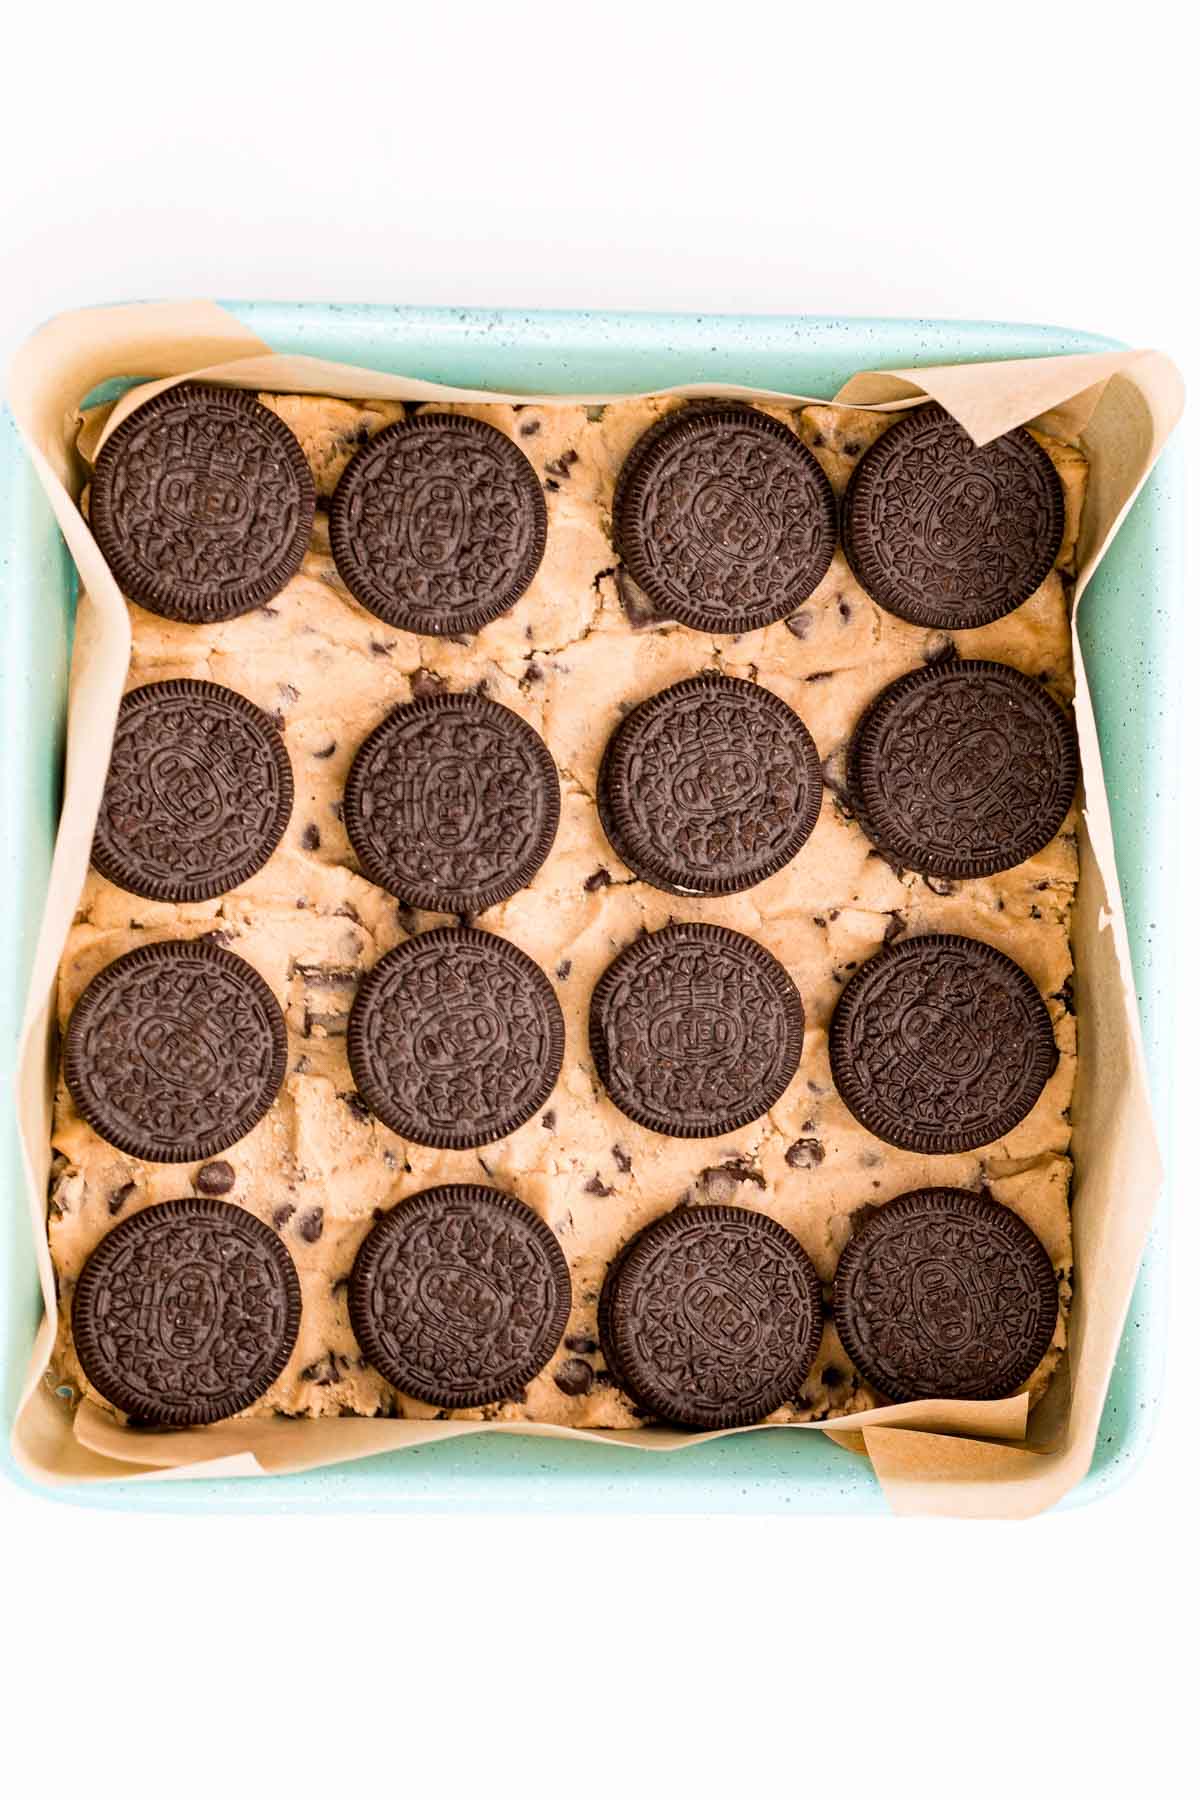 Oreos on cookie dough in a baking dish